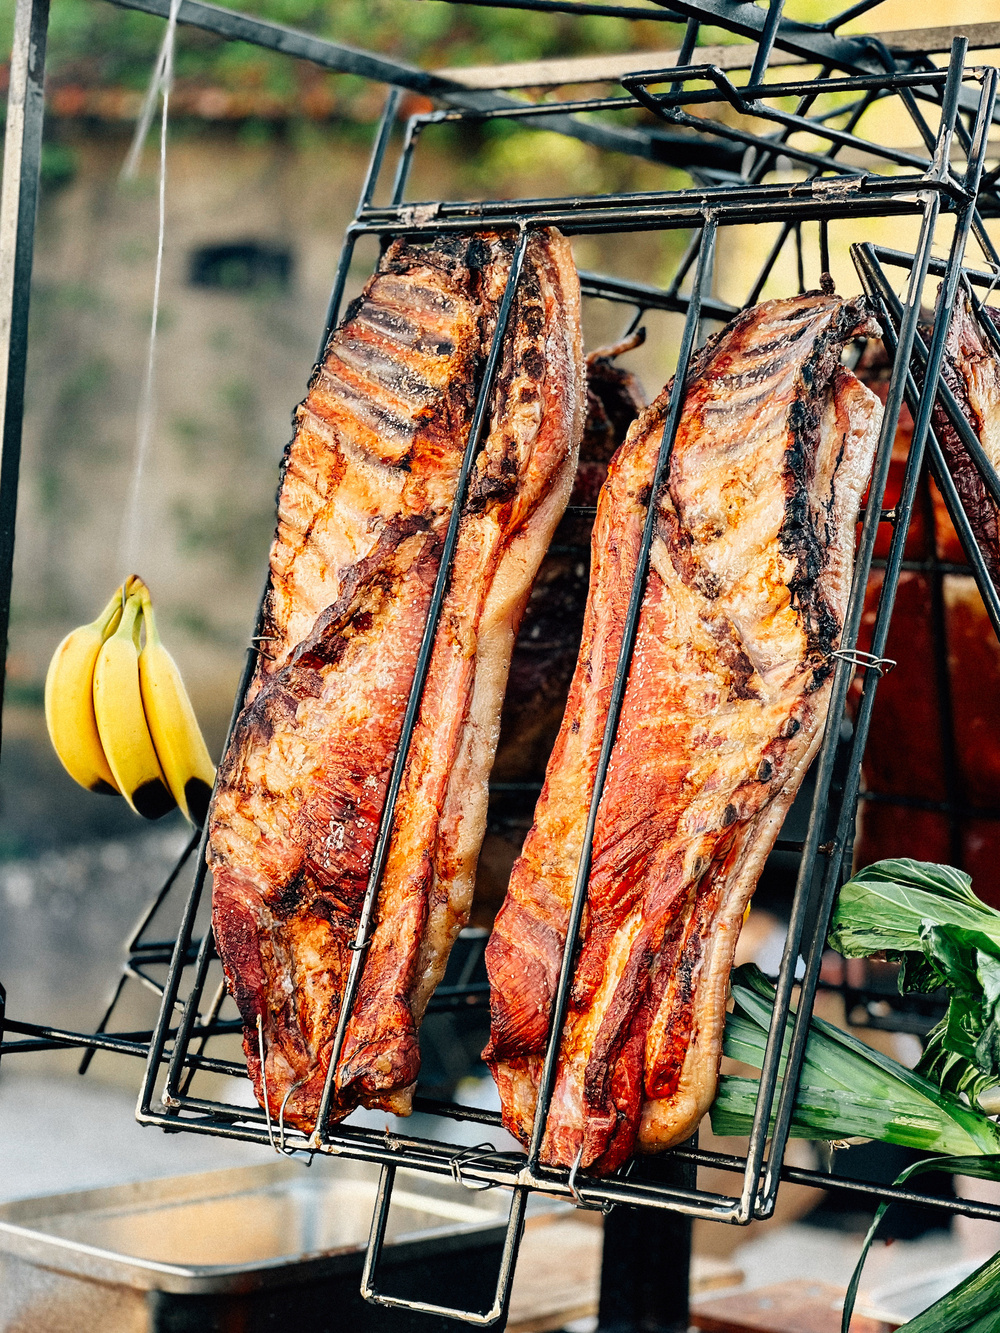 Grilled pork ribs hanging on a large outdoor rack with a bunch of bananas and green leaves in the background.